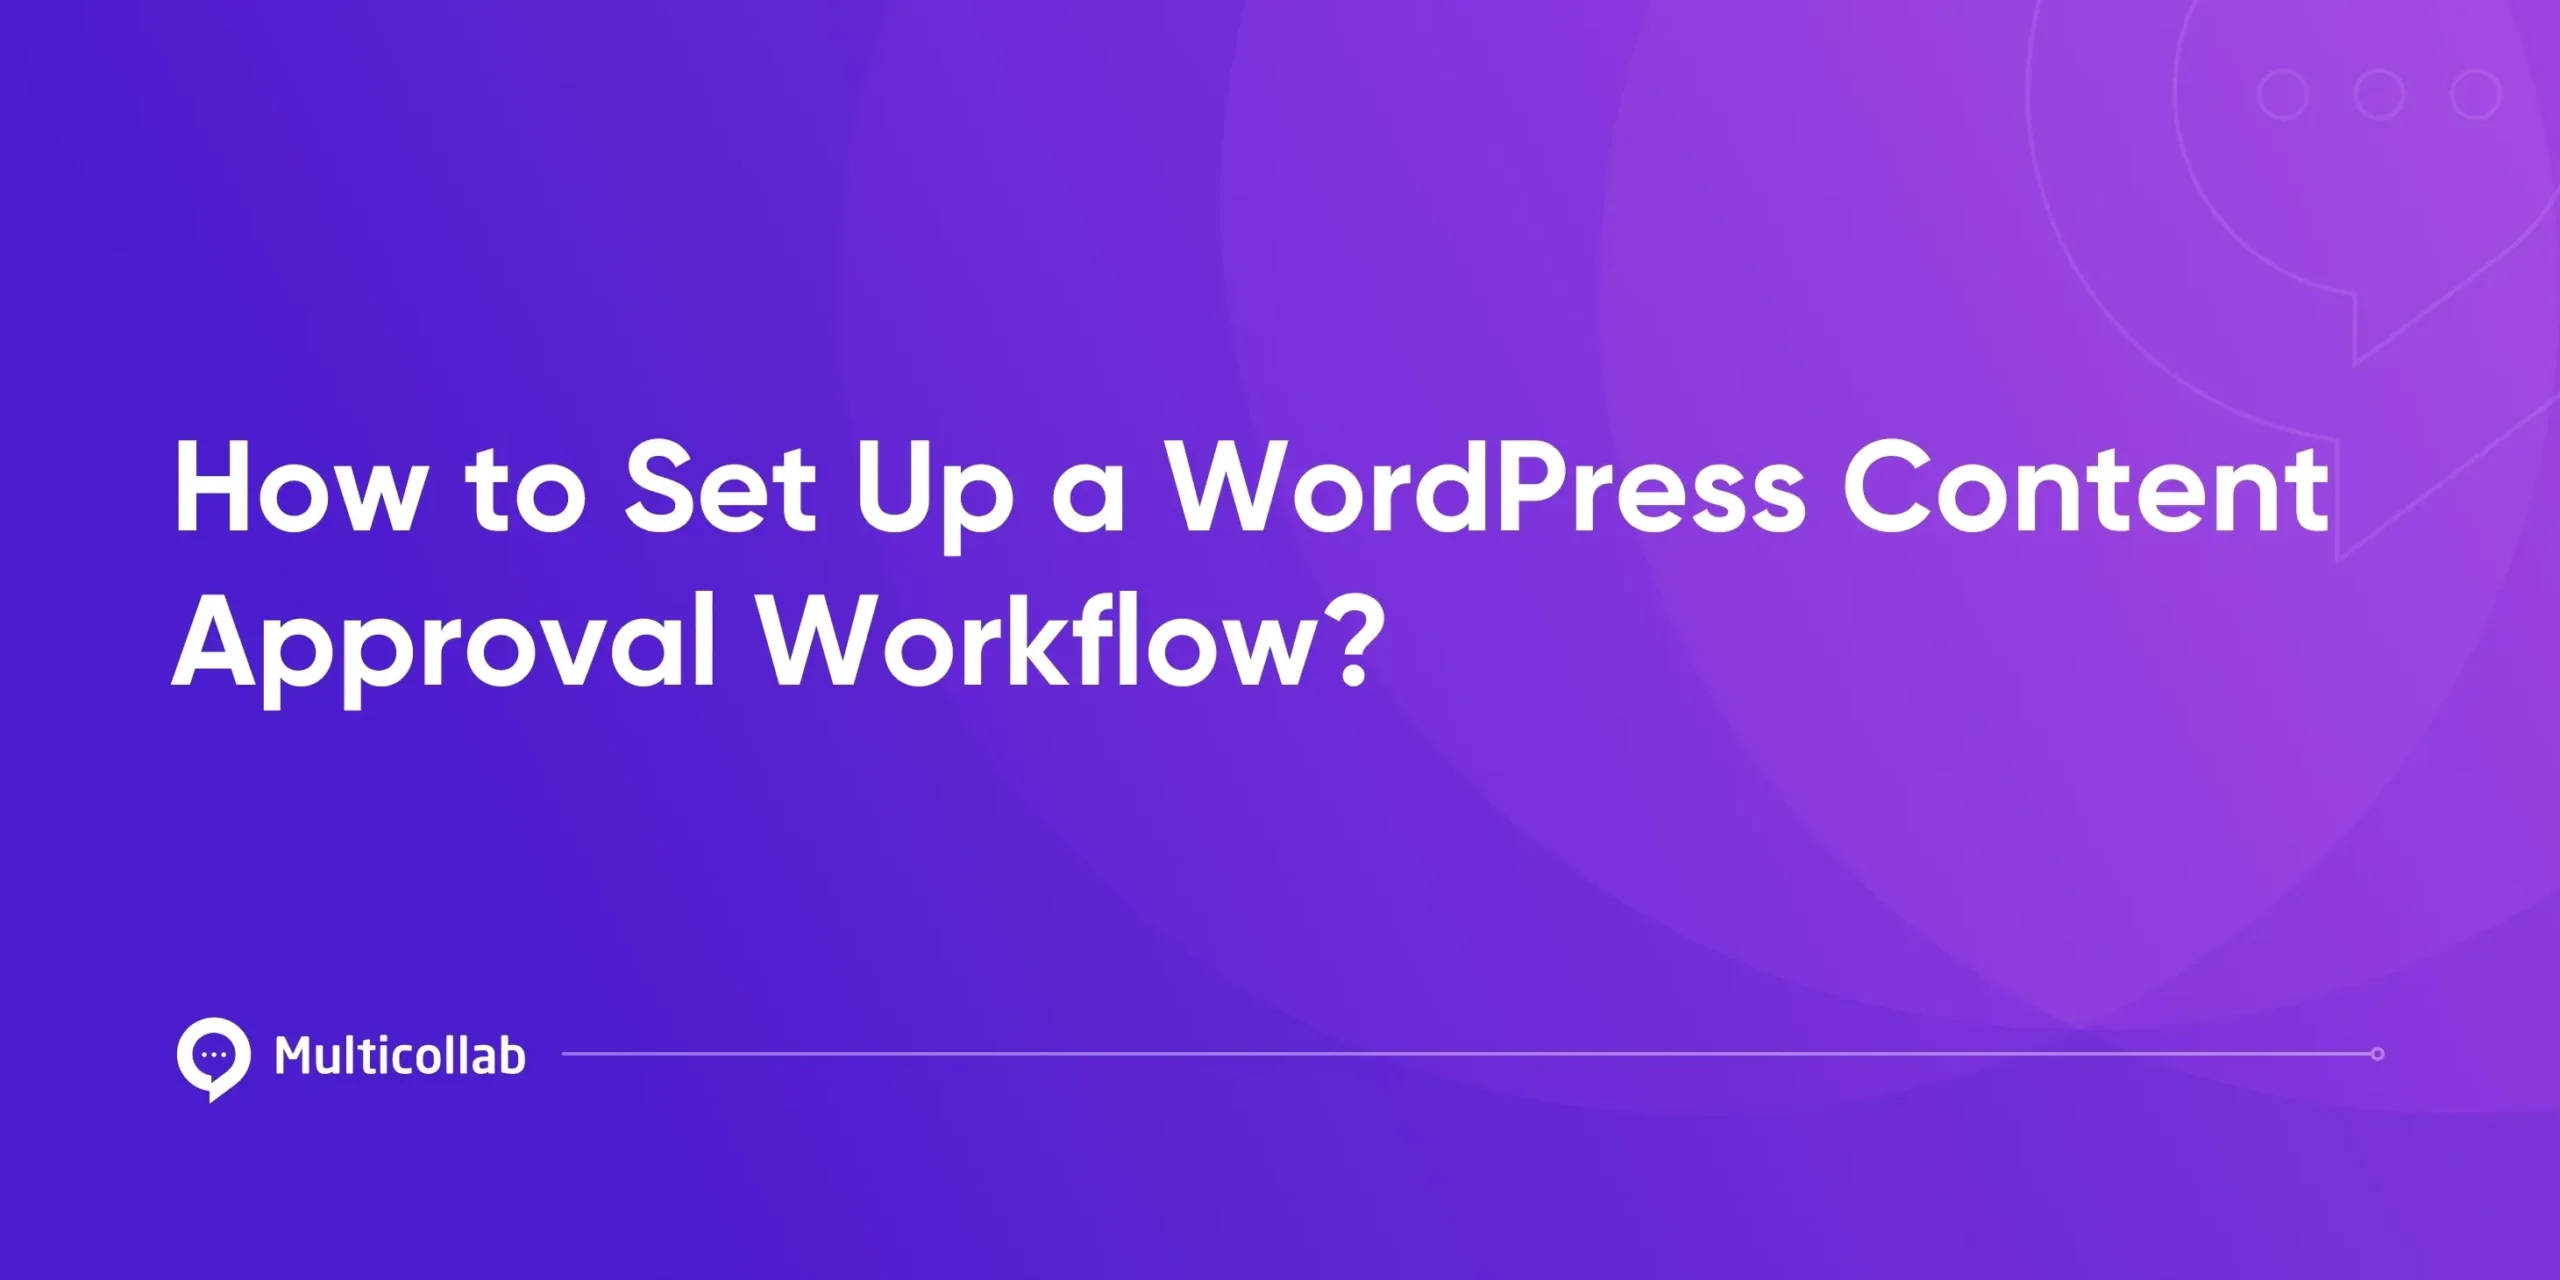 How to Set Up a WordPress Content Approval Workflow